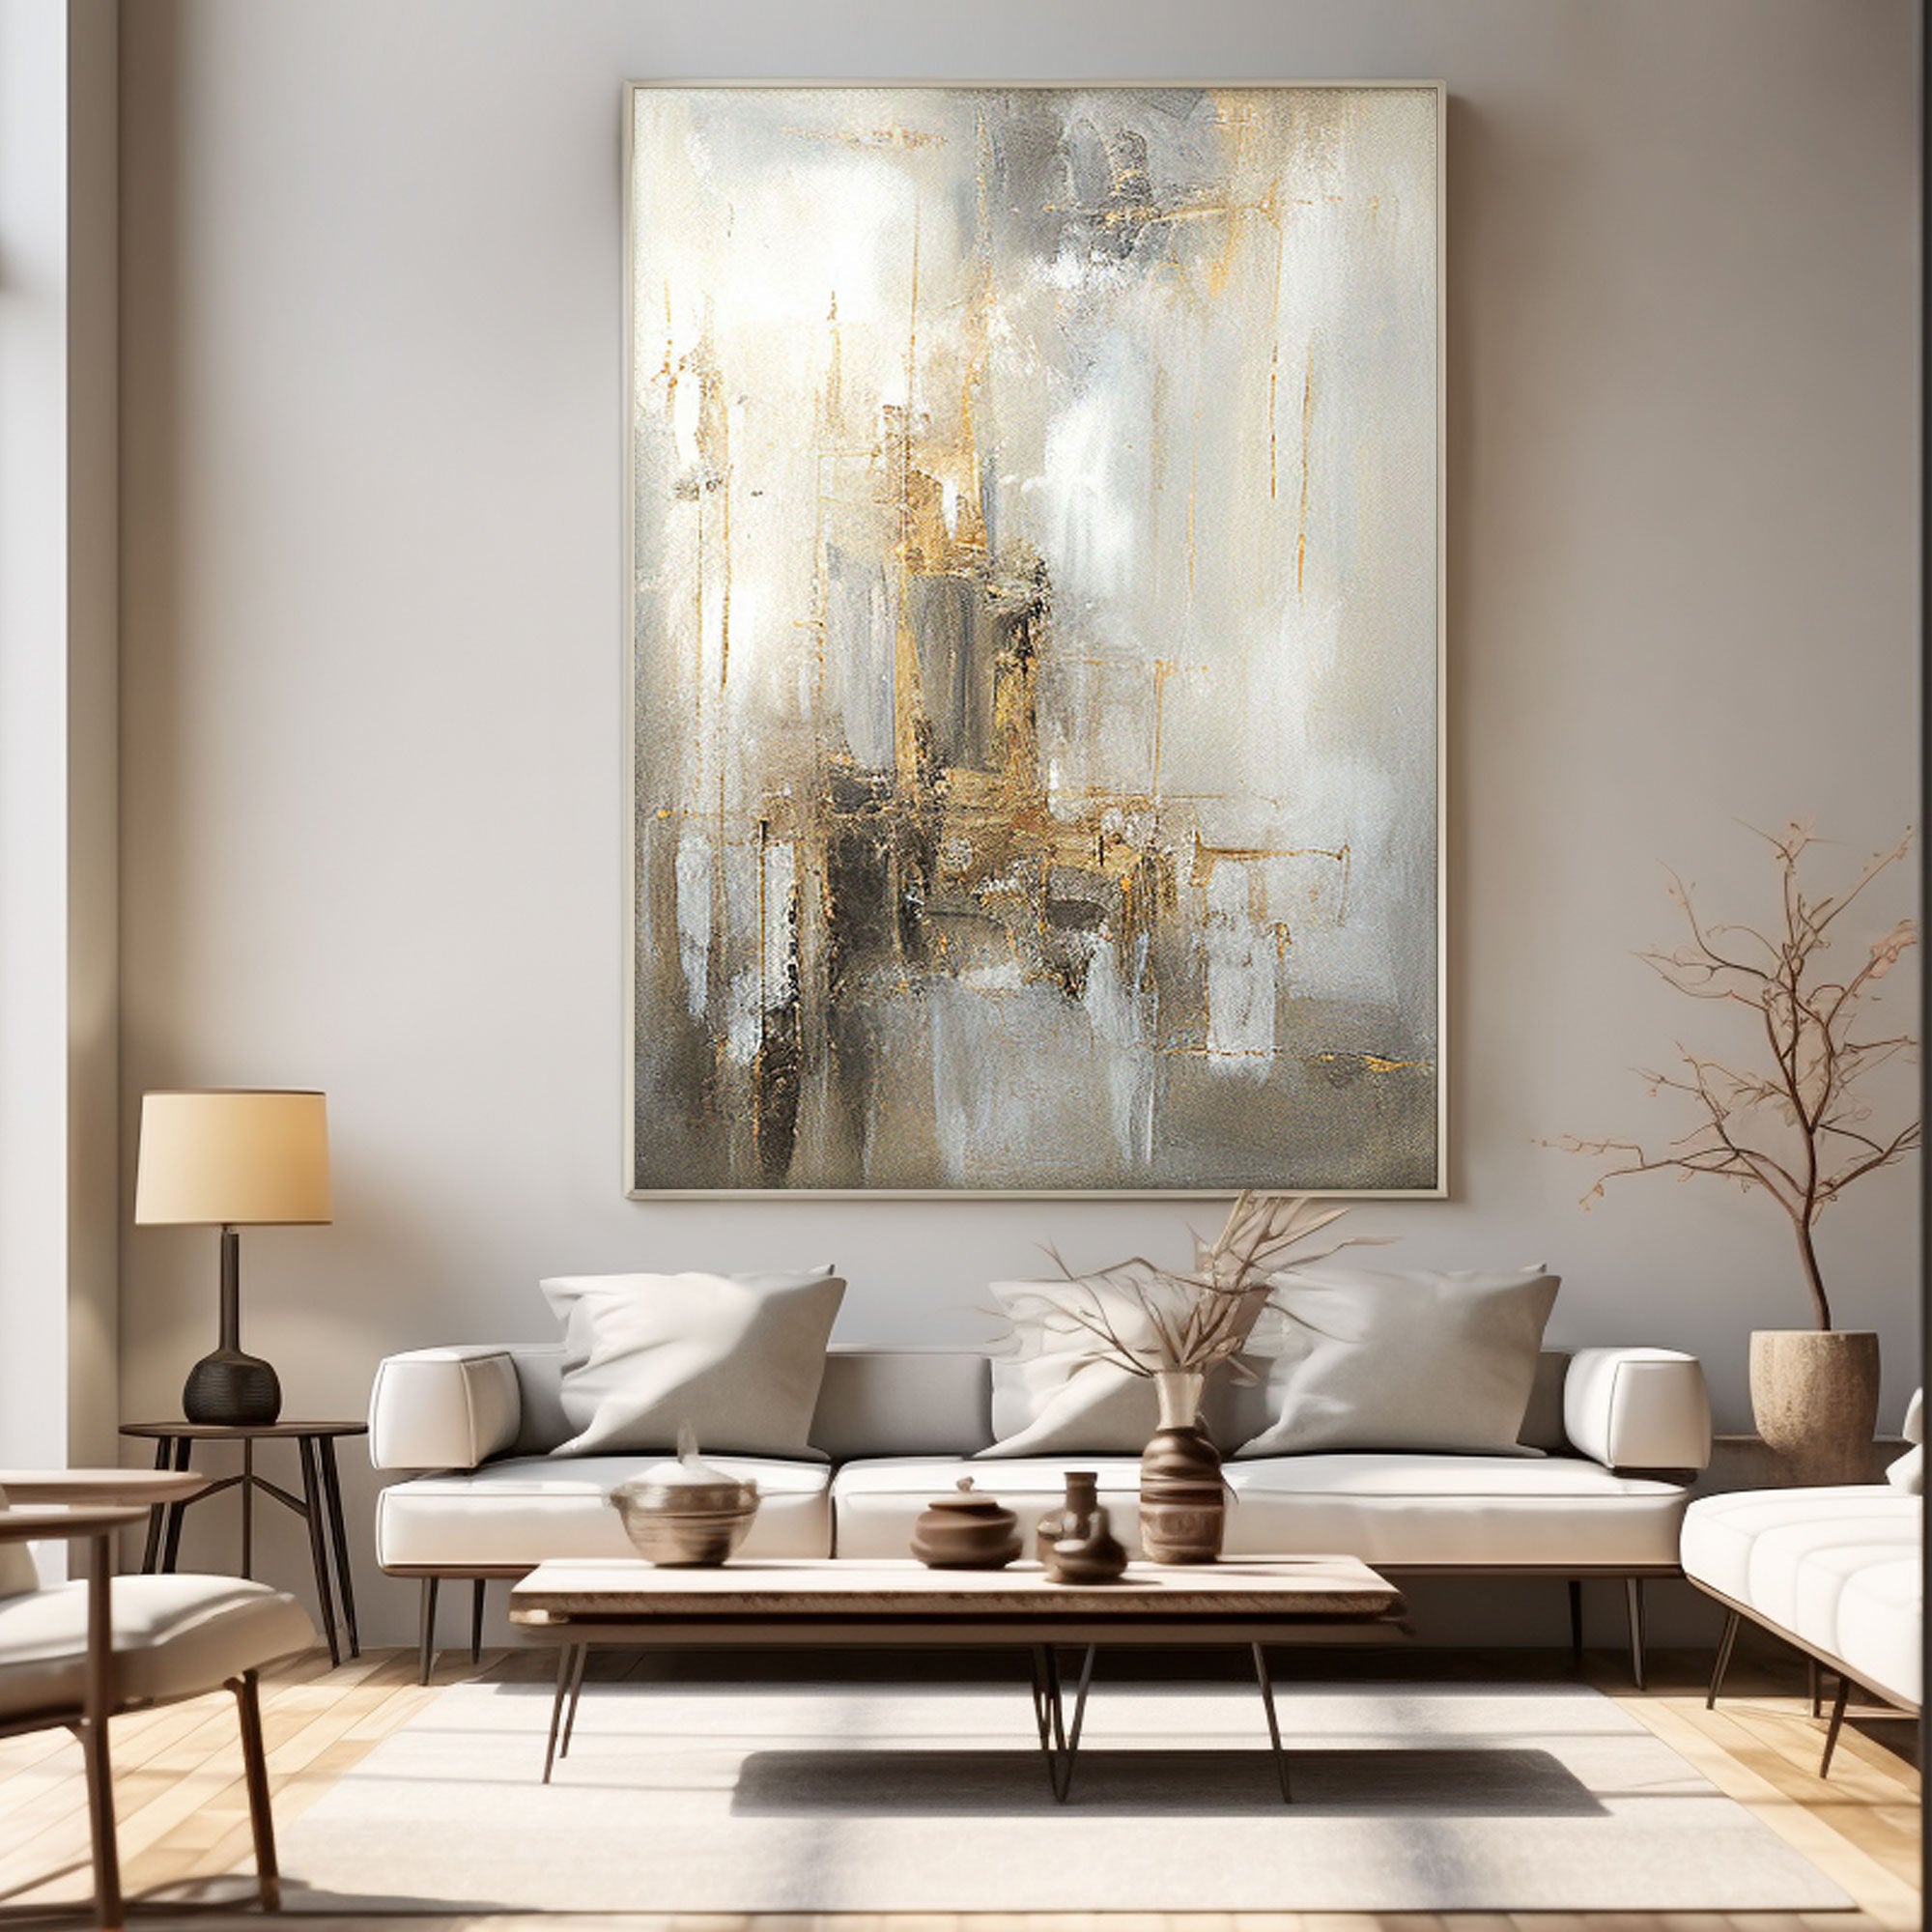 Colorful aAbstract Art Painting "Golden Reverie"